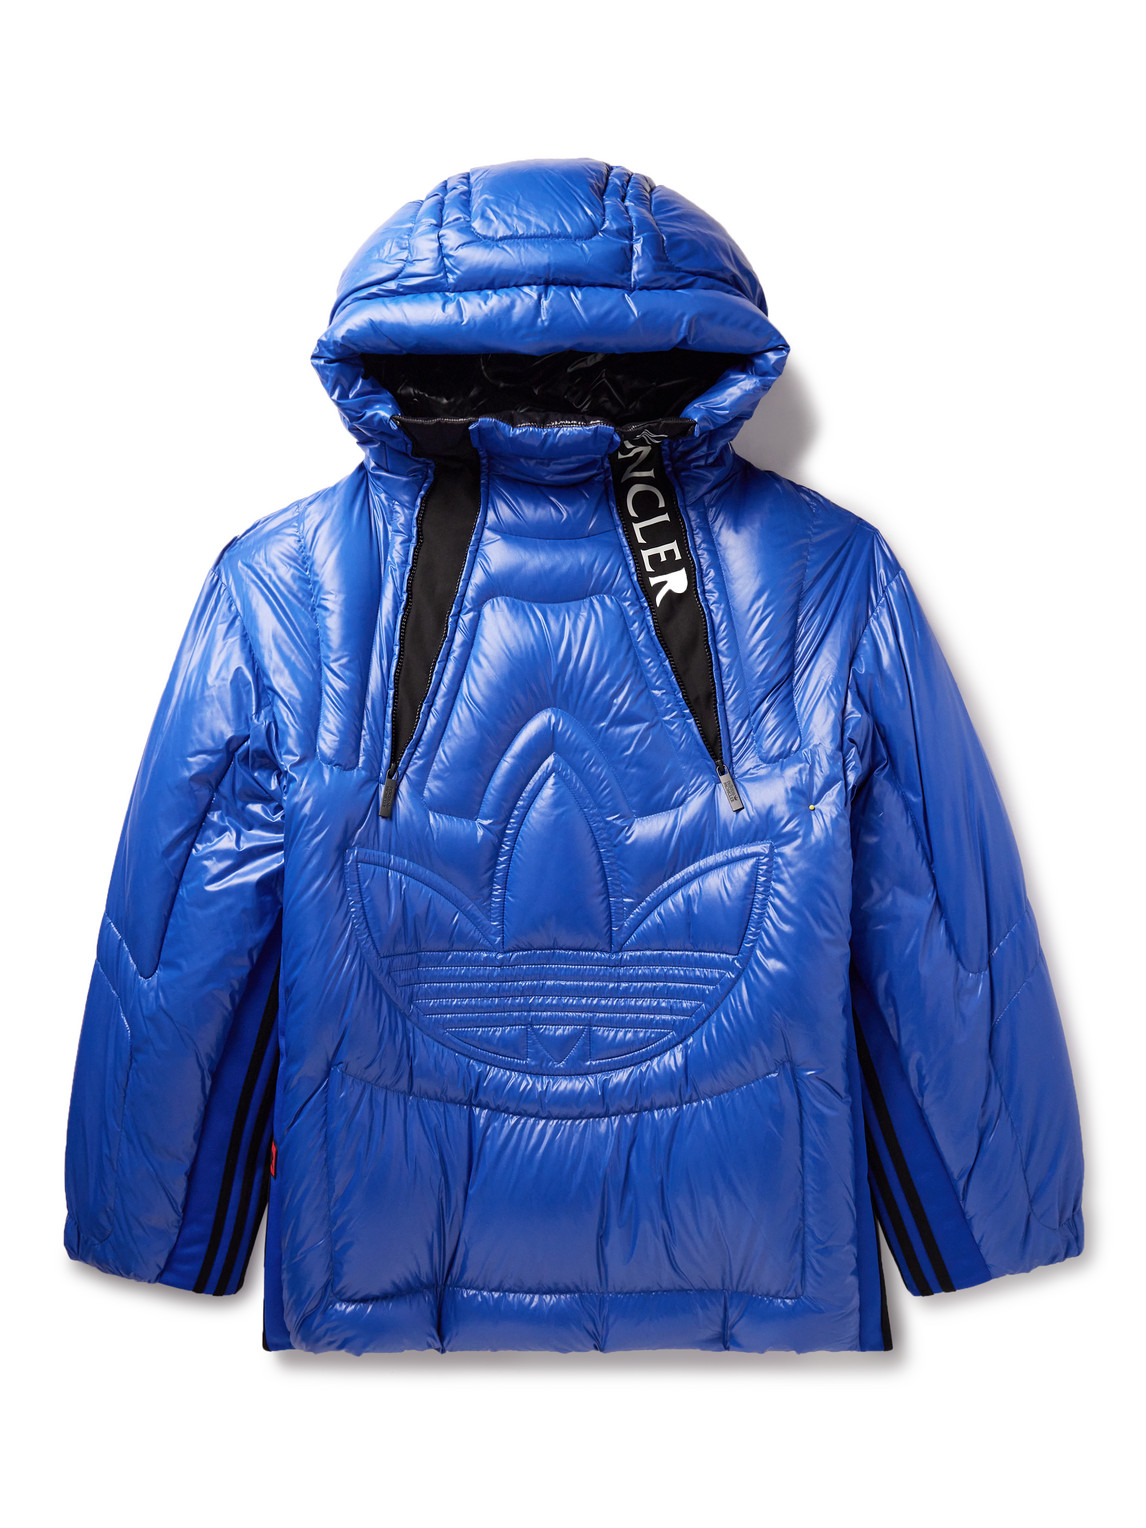 Moncler Genius X Adidas Chambery Jacket In Blue